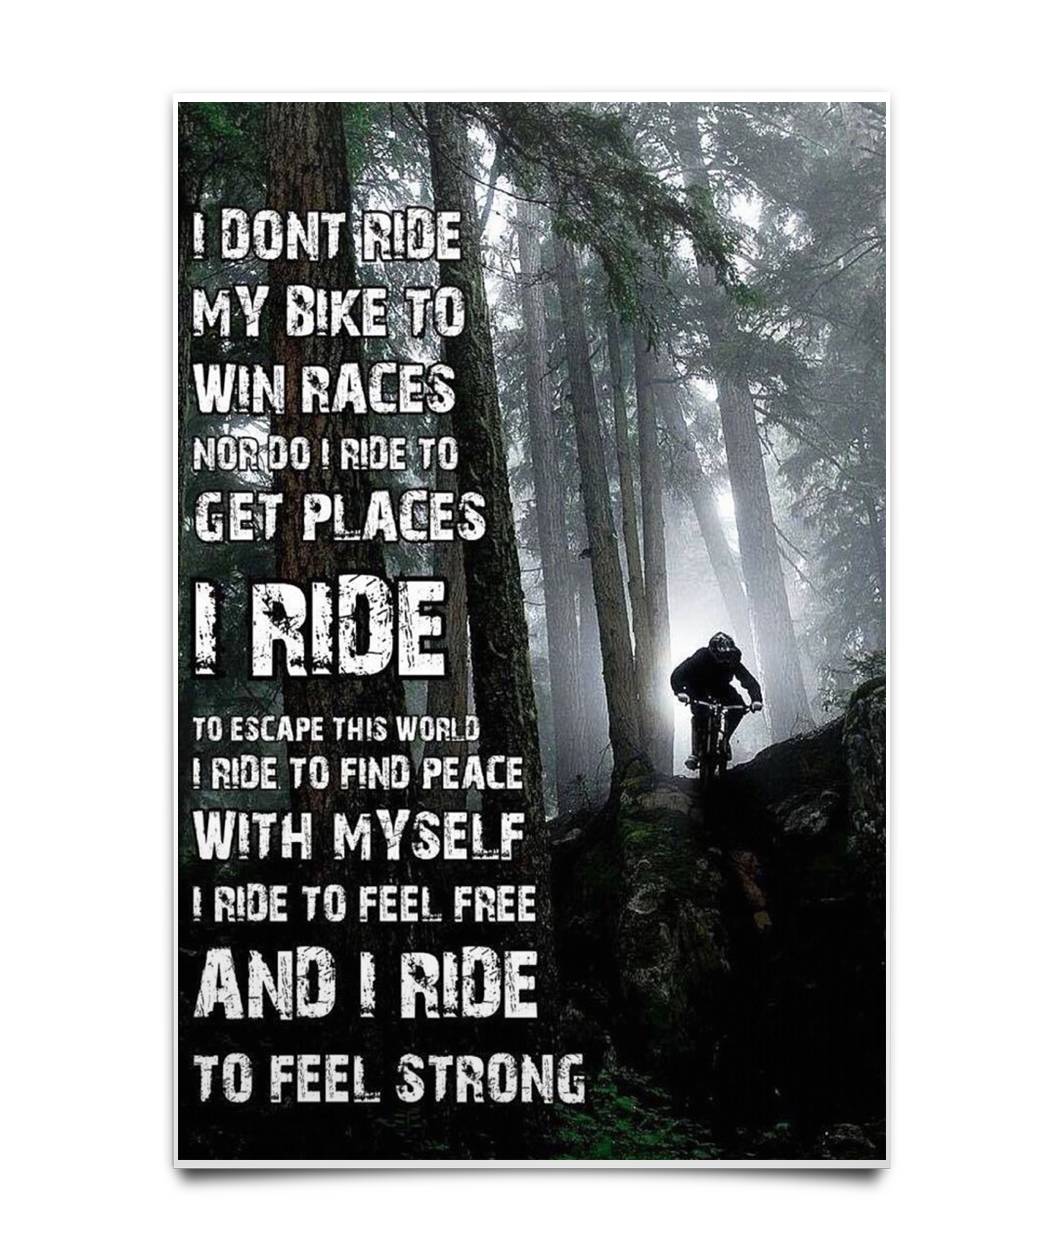 Original I don't ride my bike to win races nor do I ride to get places I ride to escape this world poster